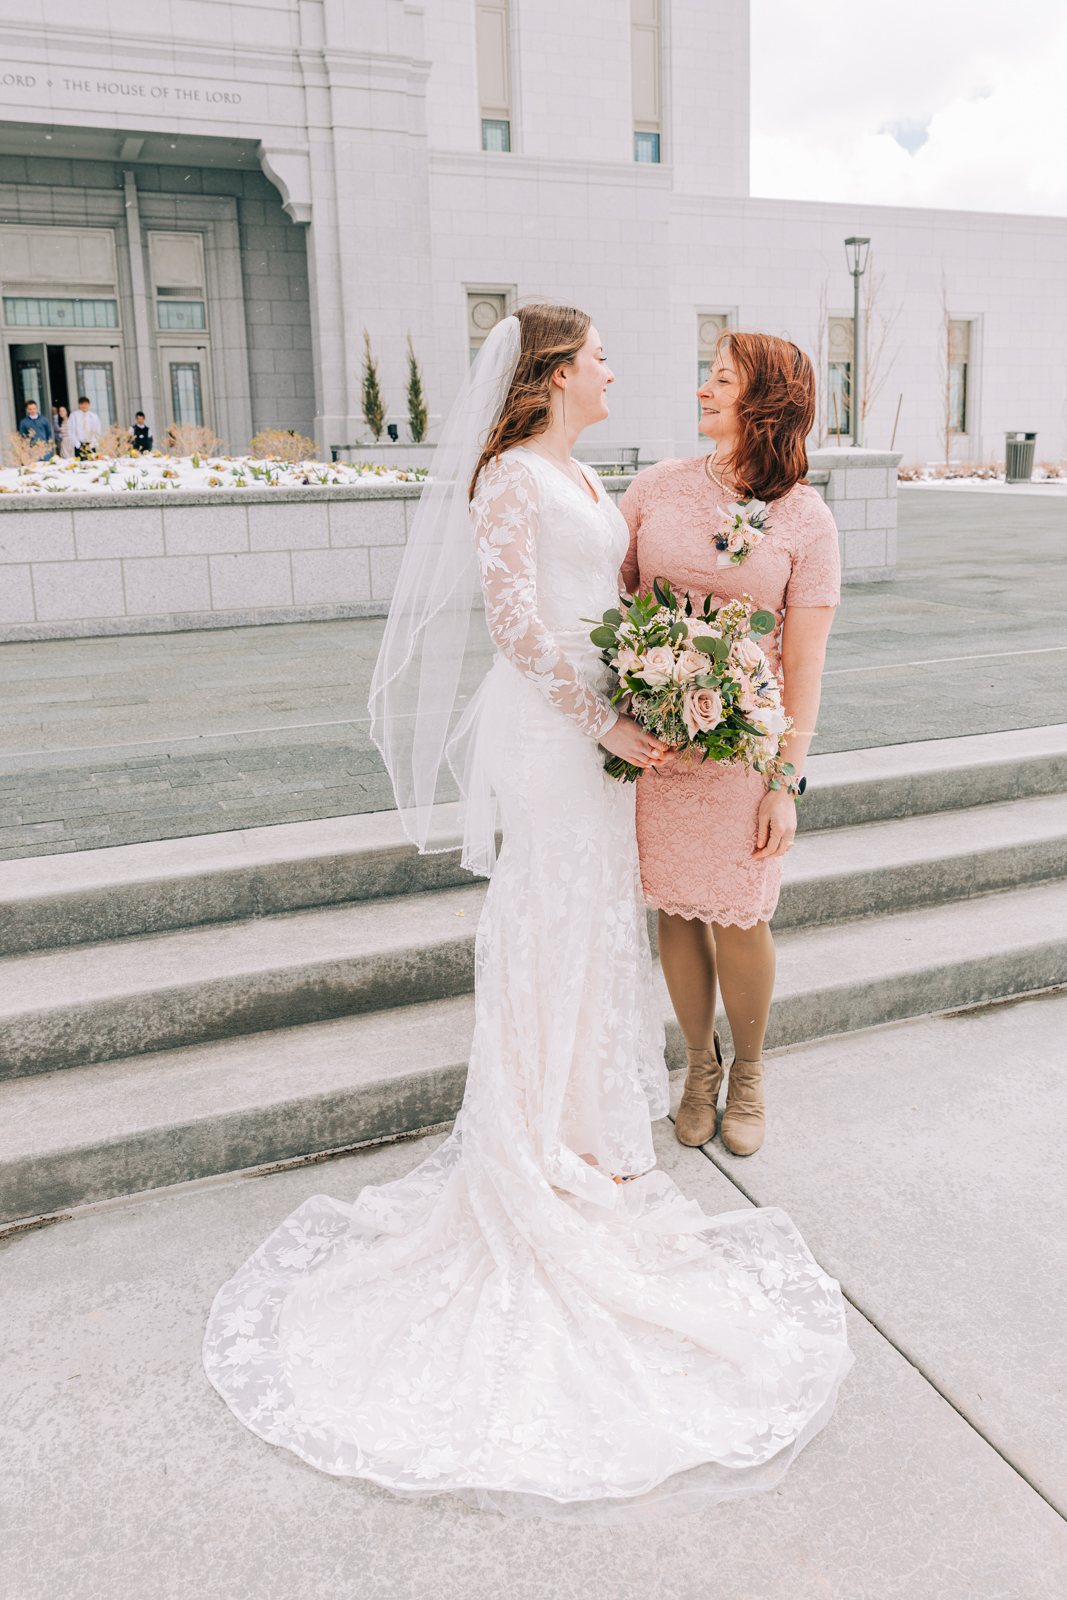 Jackson Hole wedding photographer captures mother of bride with bride